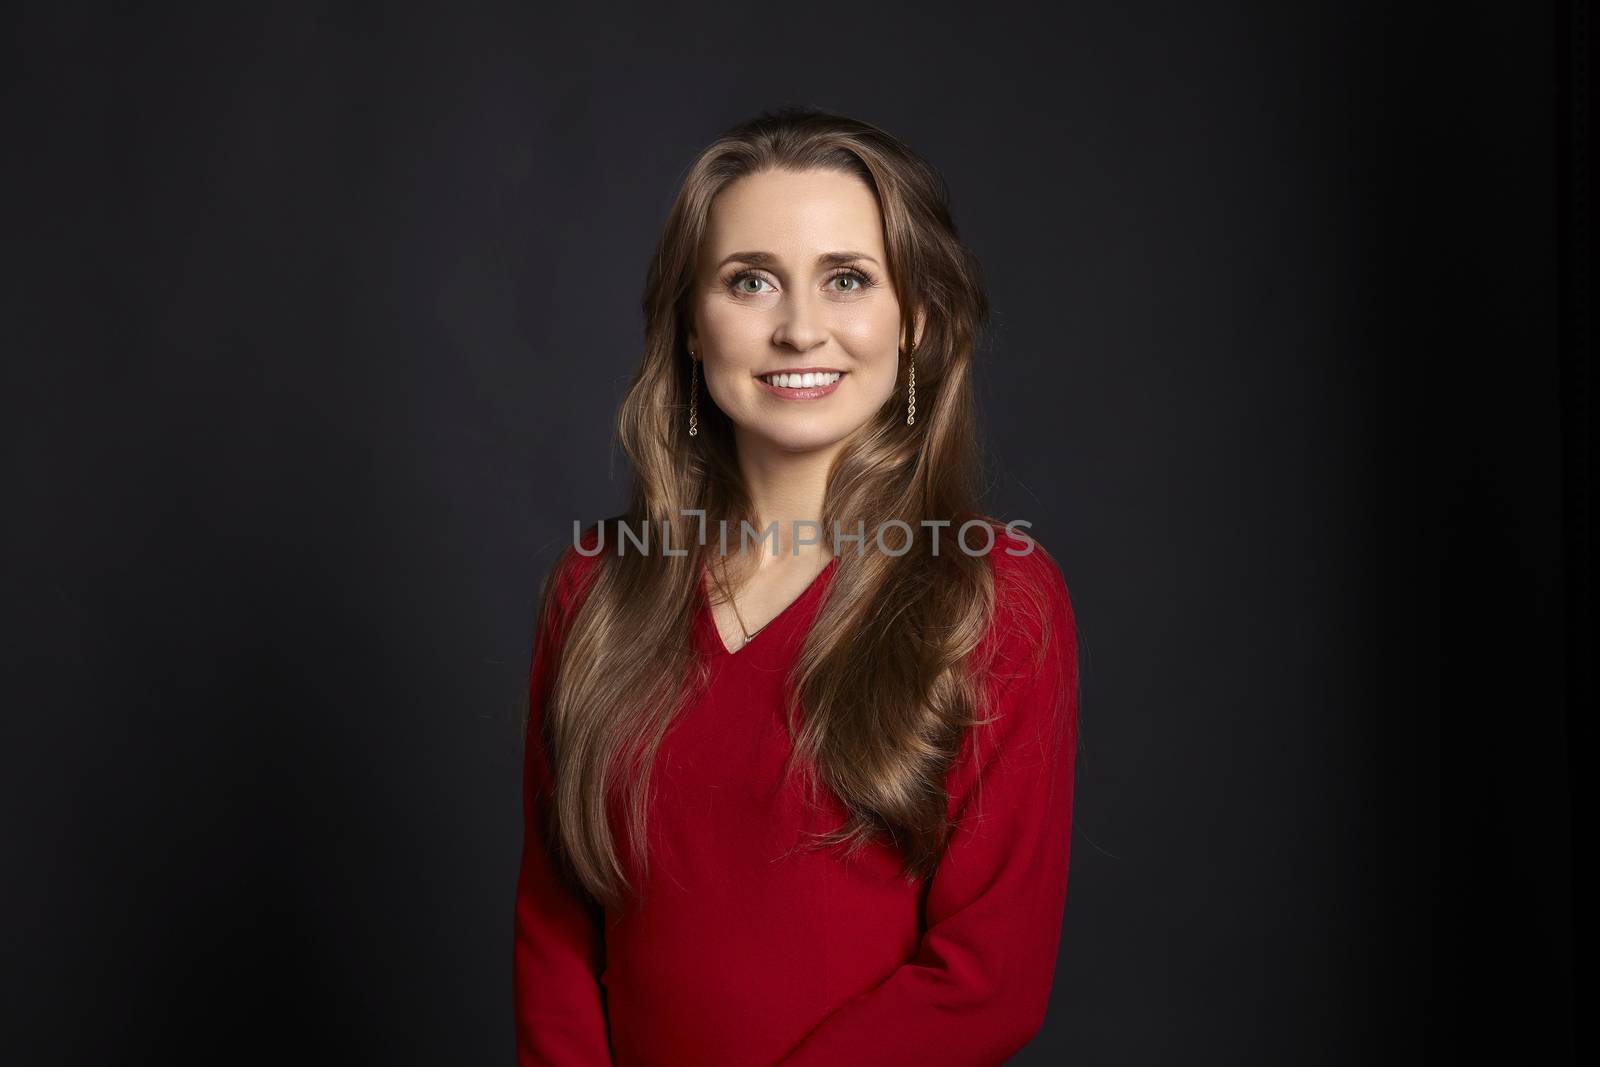 Studio portrait of young smiling woman in red dress with long hair, white smile and green eyes on black background.